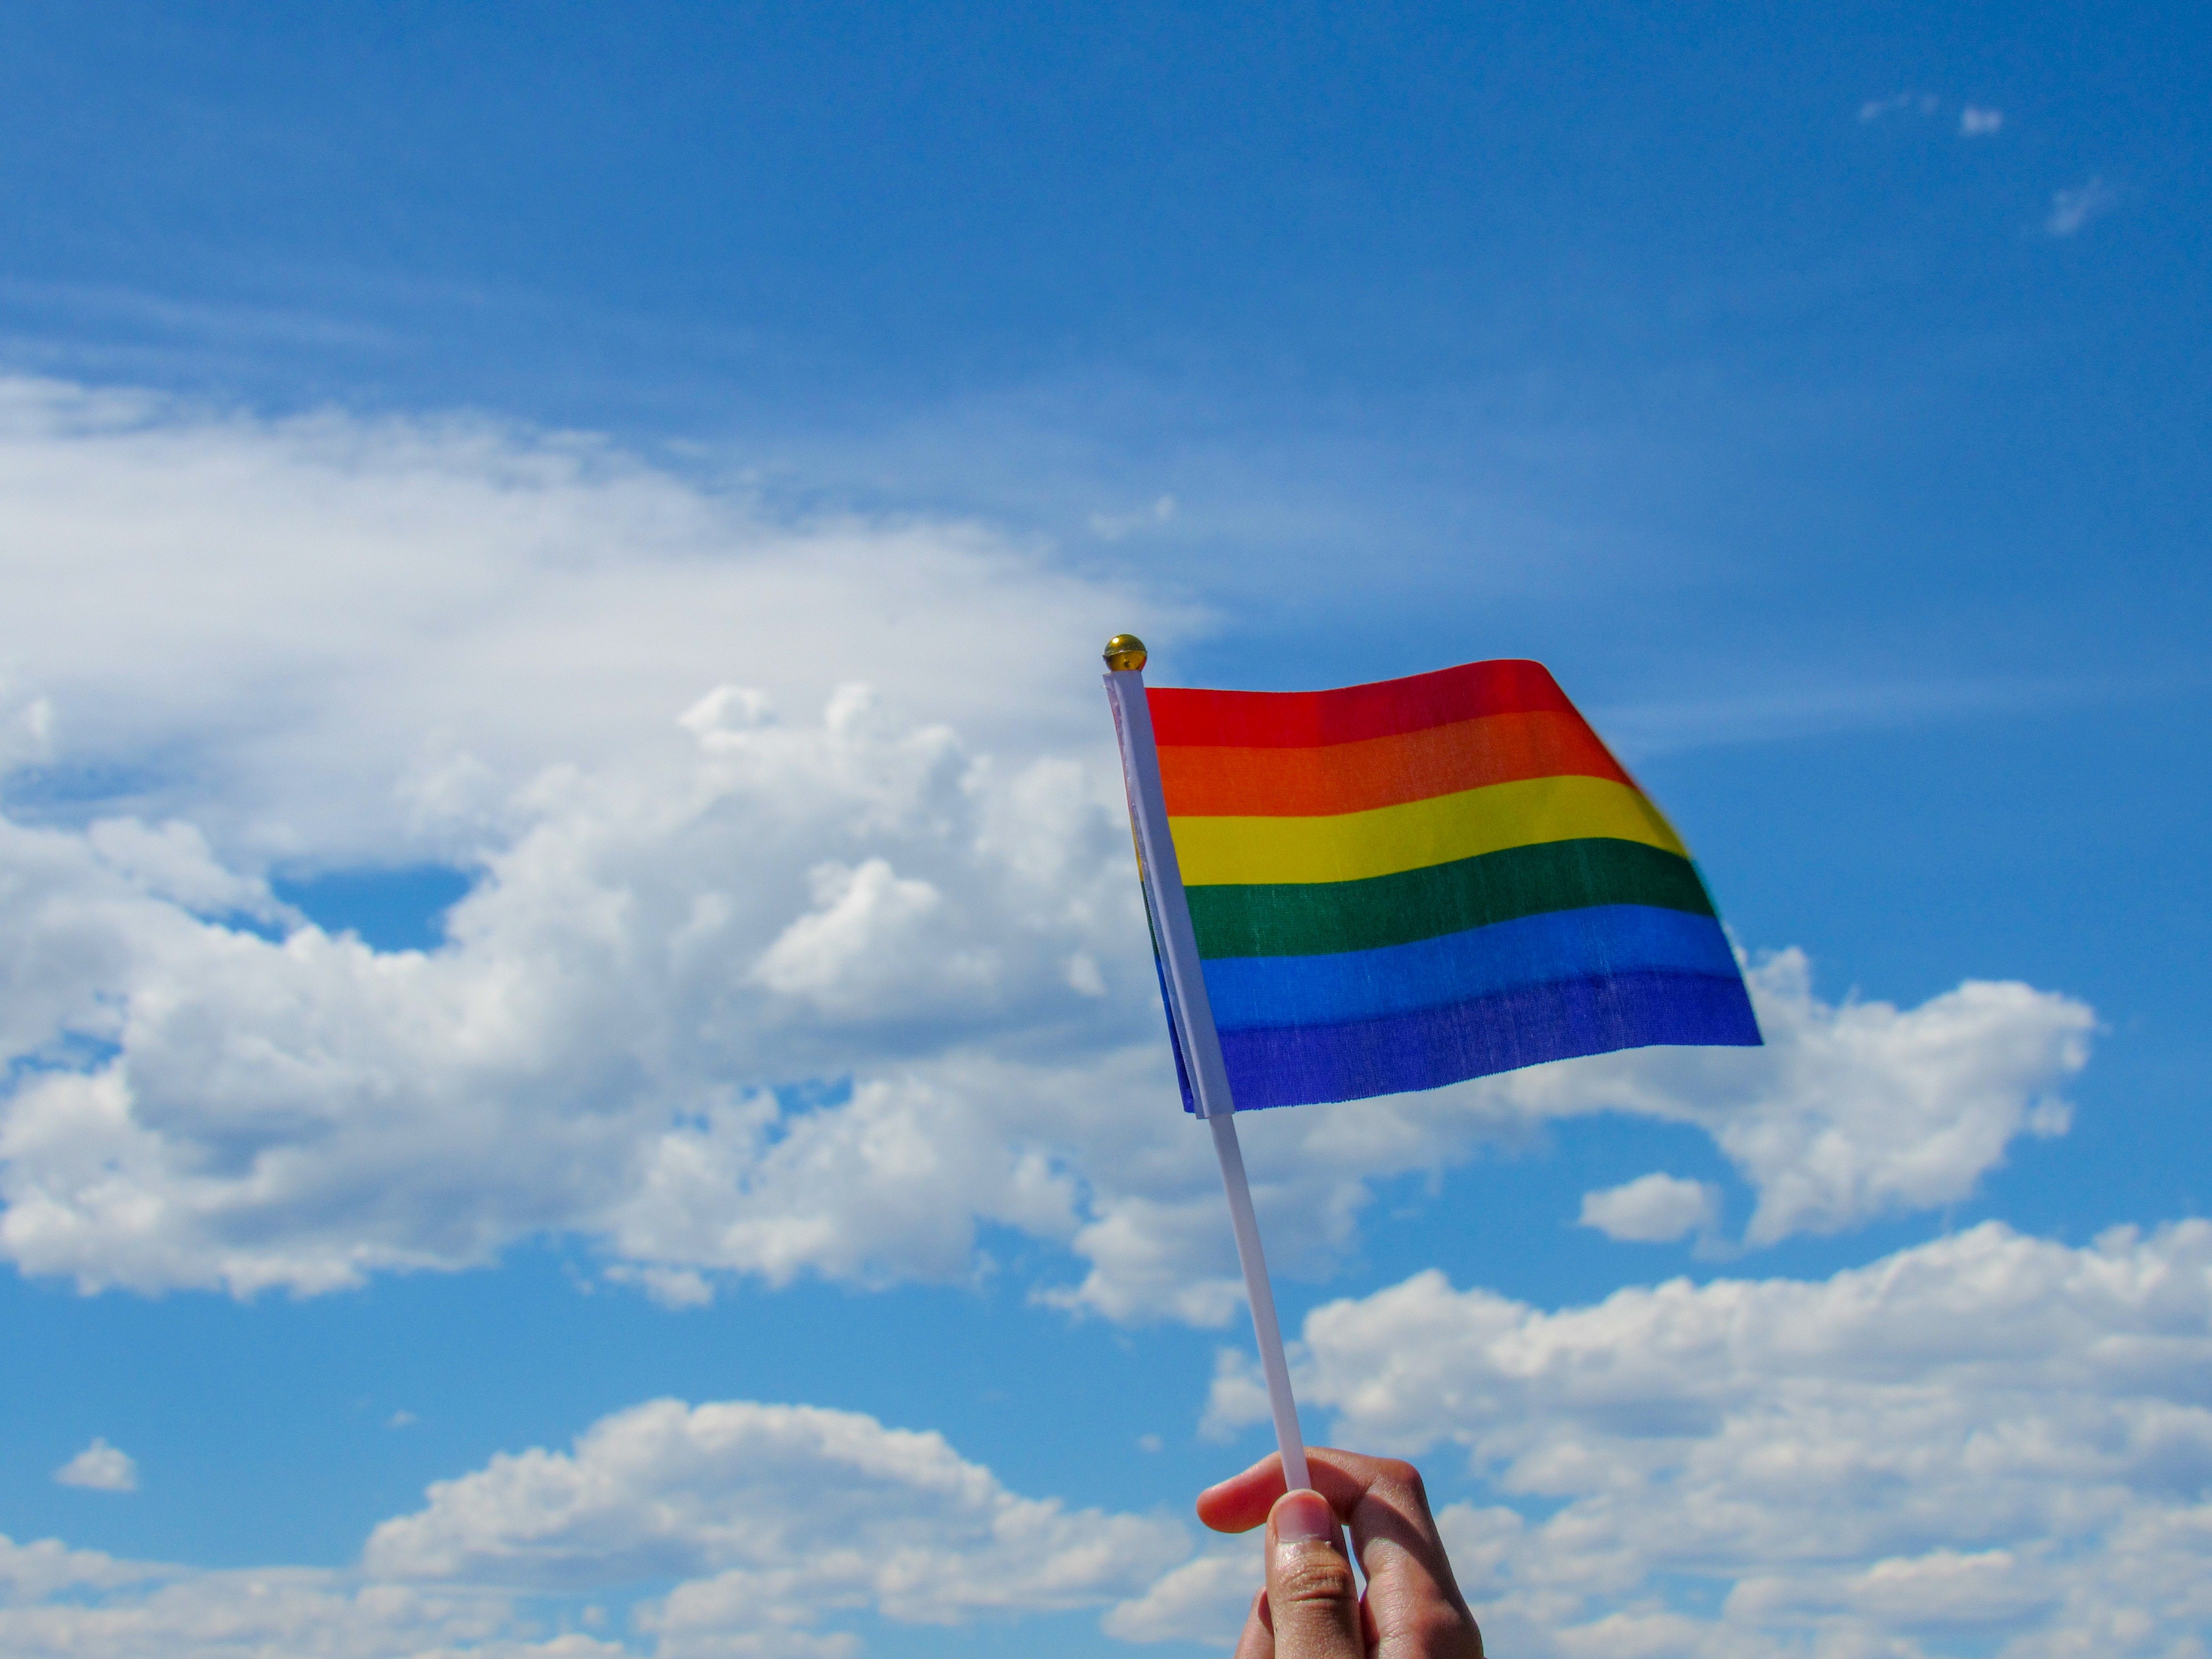 Cover image for  article: Marketing to LGBT+ People: The Rainbow Flag